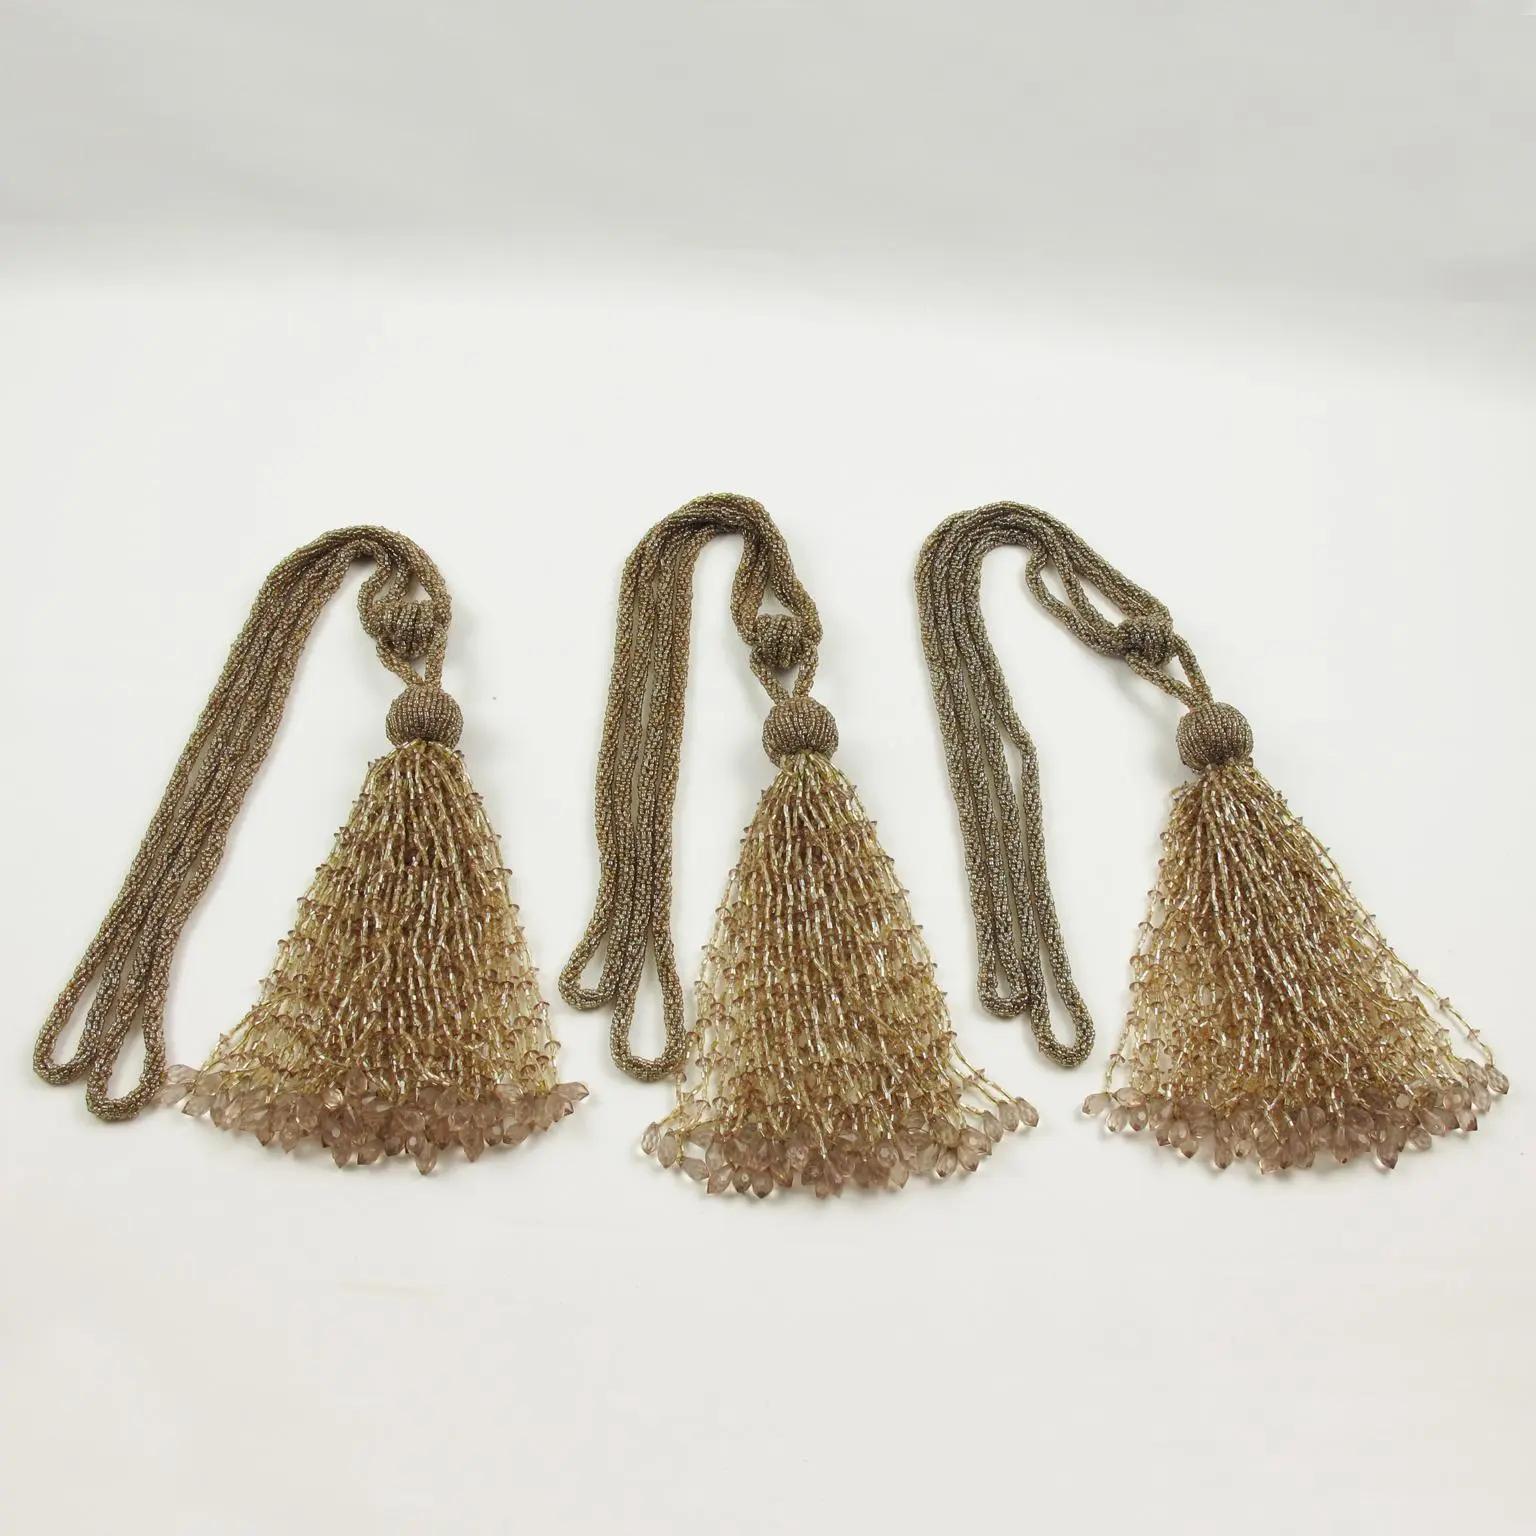 This is a lovely set of three Art Deco curtain tassel tiebacks or retainers. They are hand-made with crystal beads, faceted, and carved in assorted colors of gold, champagne, and light powder pink. These are beautiful quality decorations for any